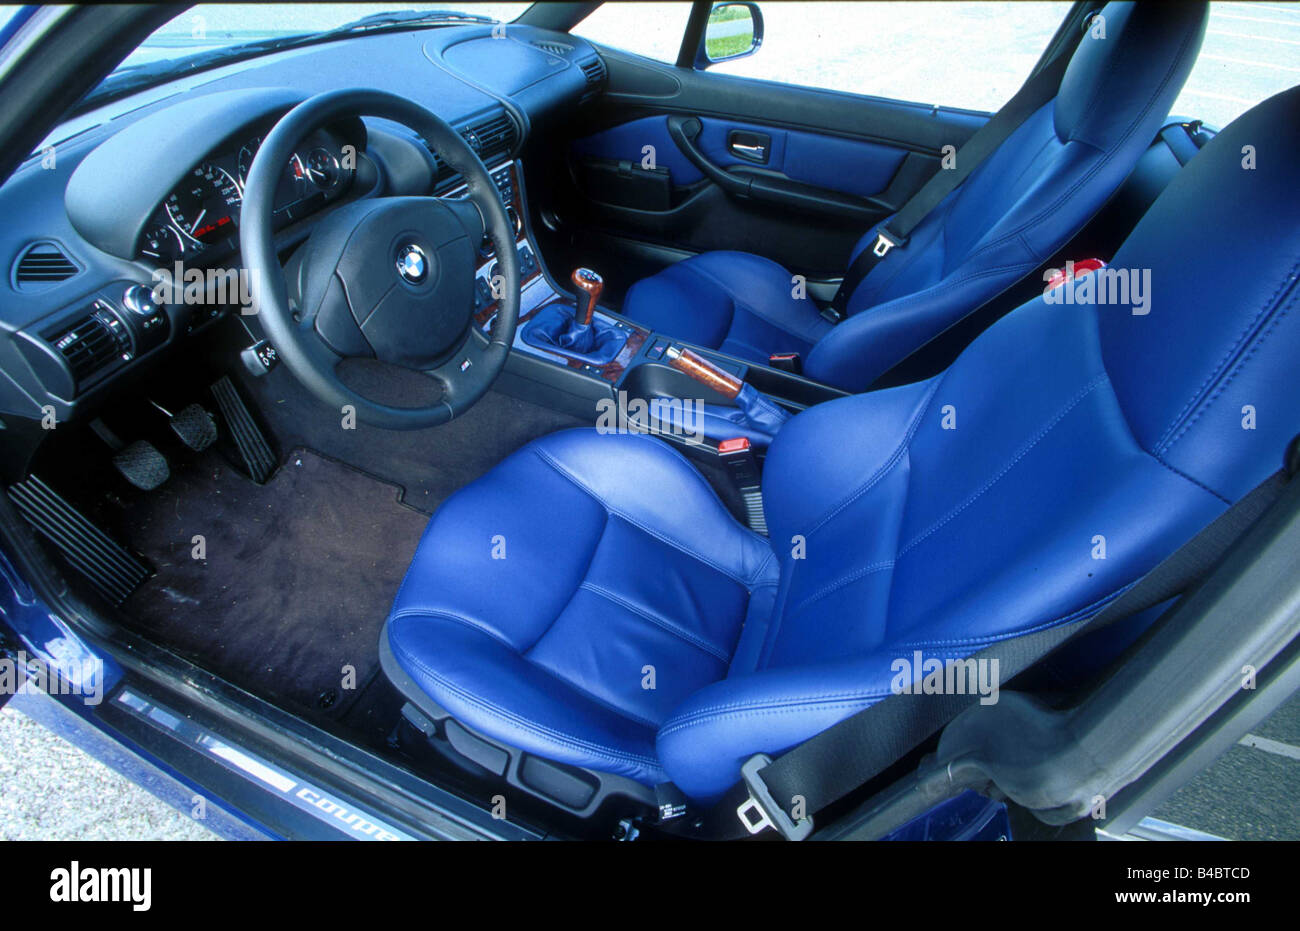 Car, BMW Z3 coupe, roadster, model year 2002-, interior view, Interior view, blue interior equipment Stock Photo